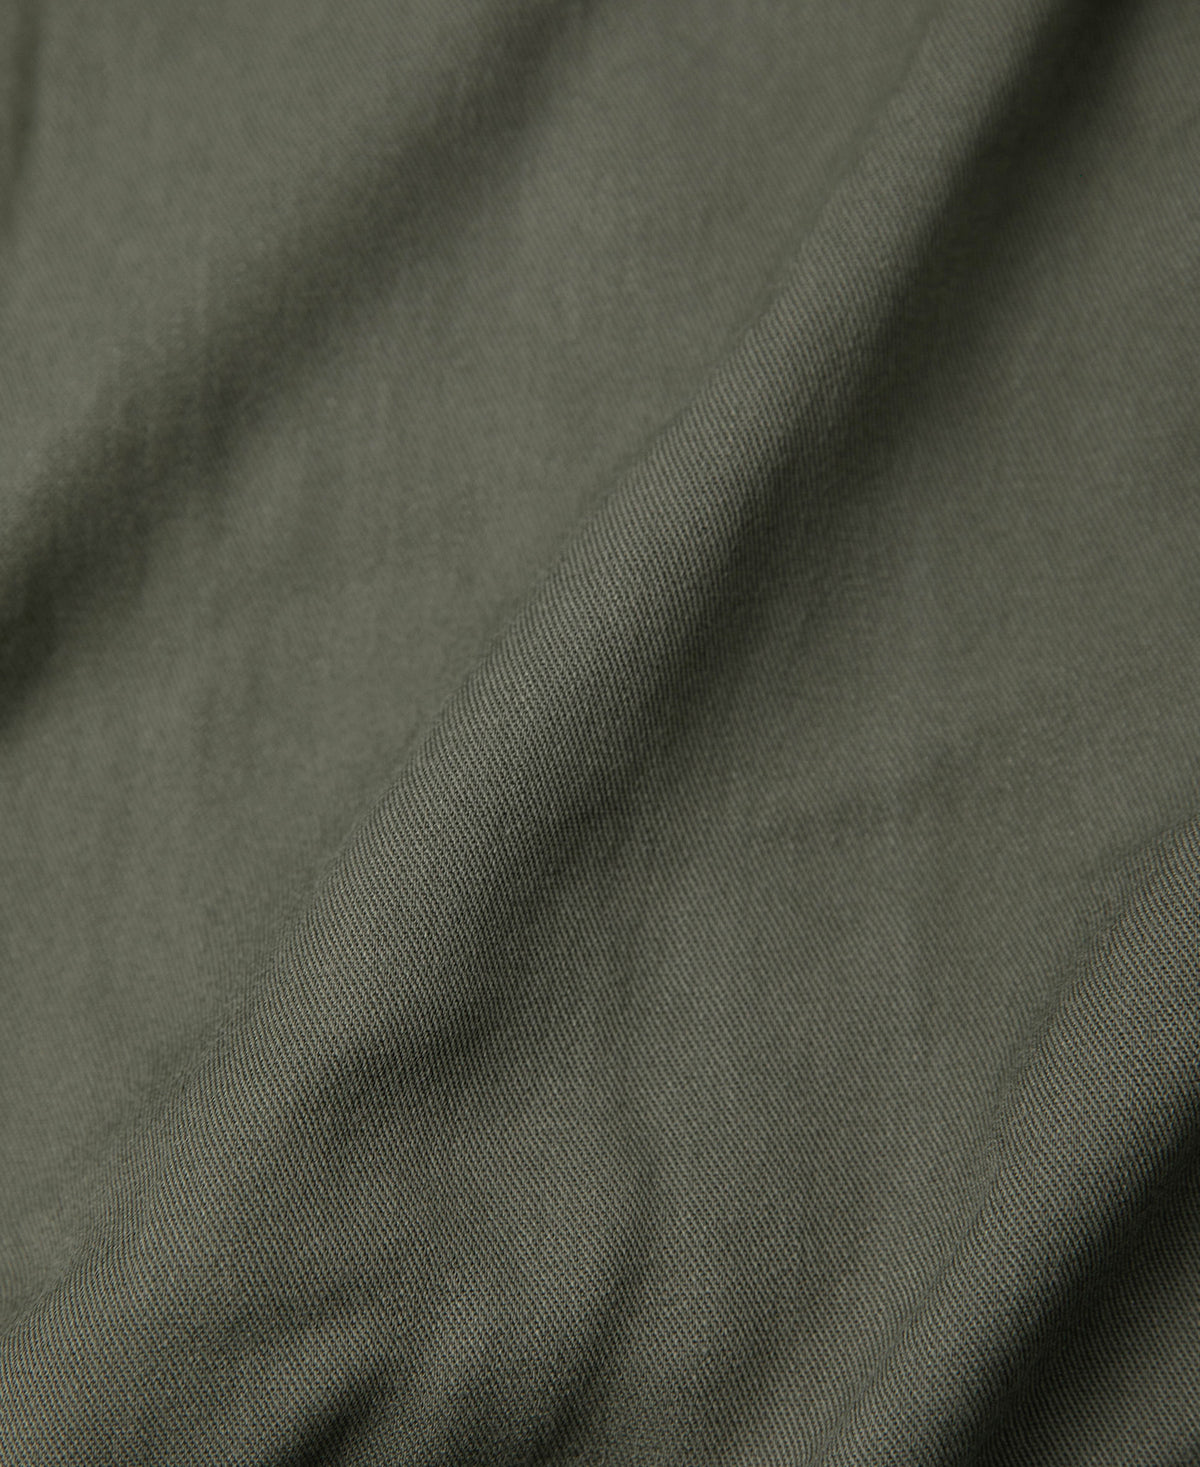 Loose Embroidery Bowling Shirt - Olive